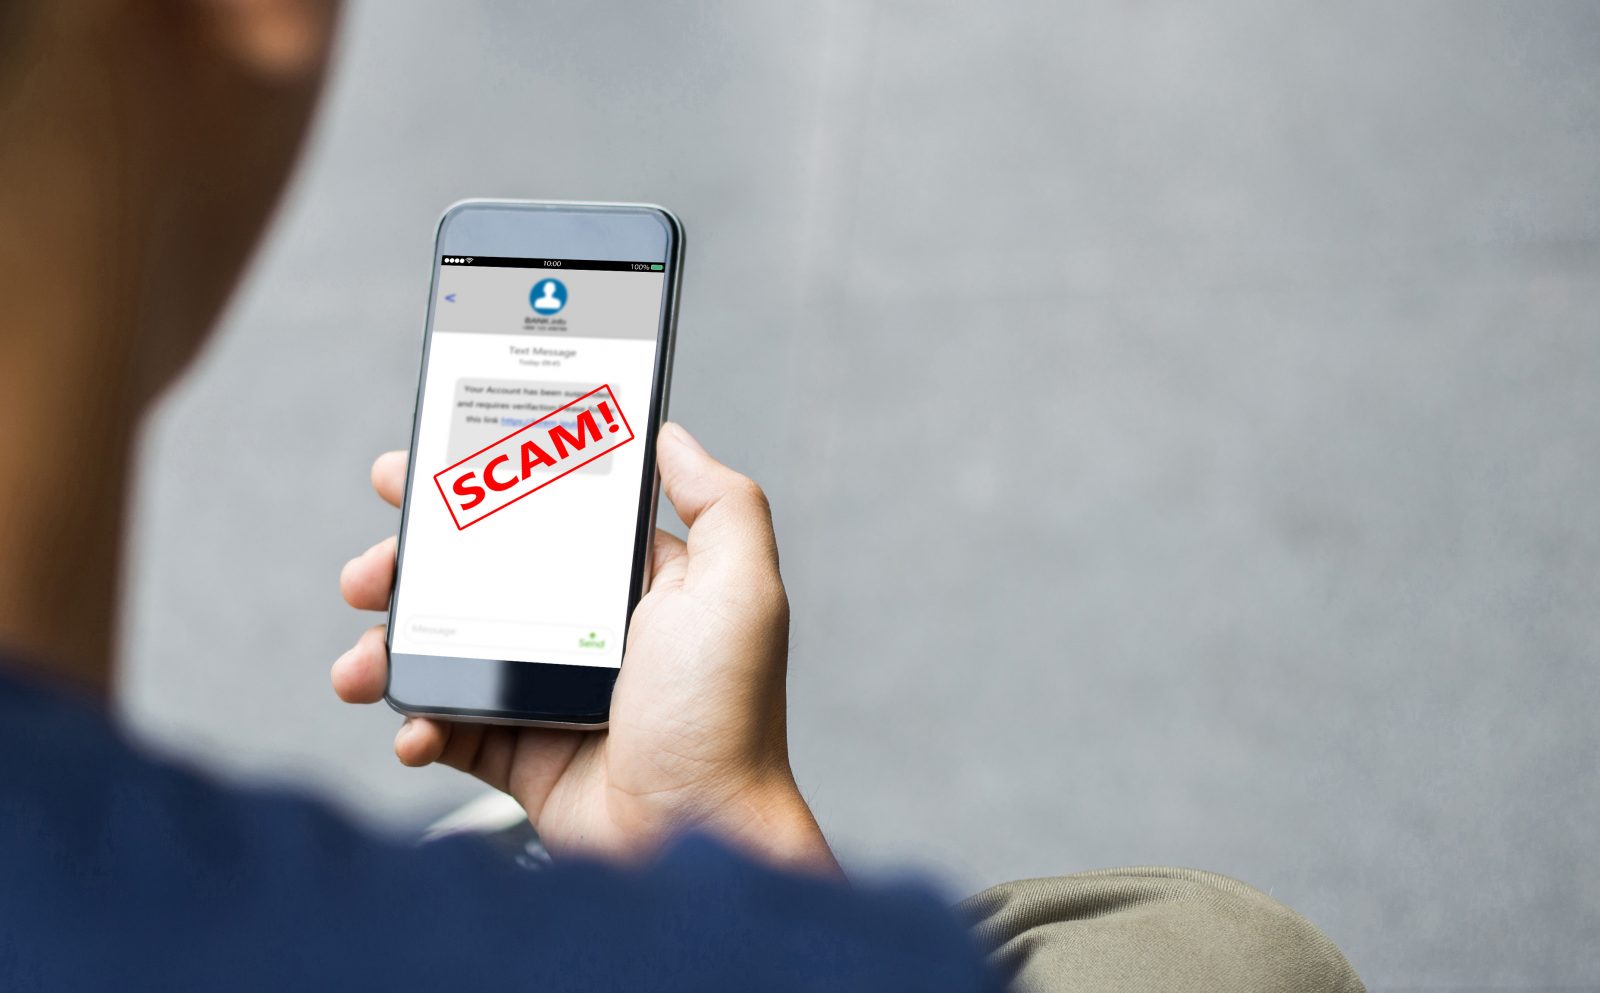 A man holds a smartphone with the word "Scam!" written across the screen in bold red letters.